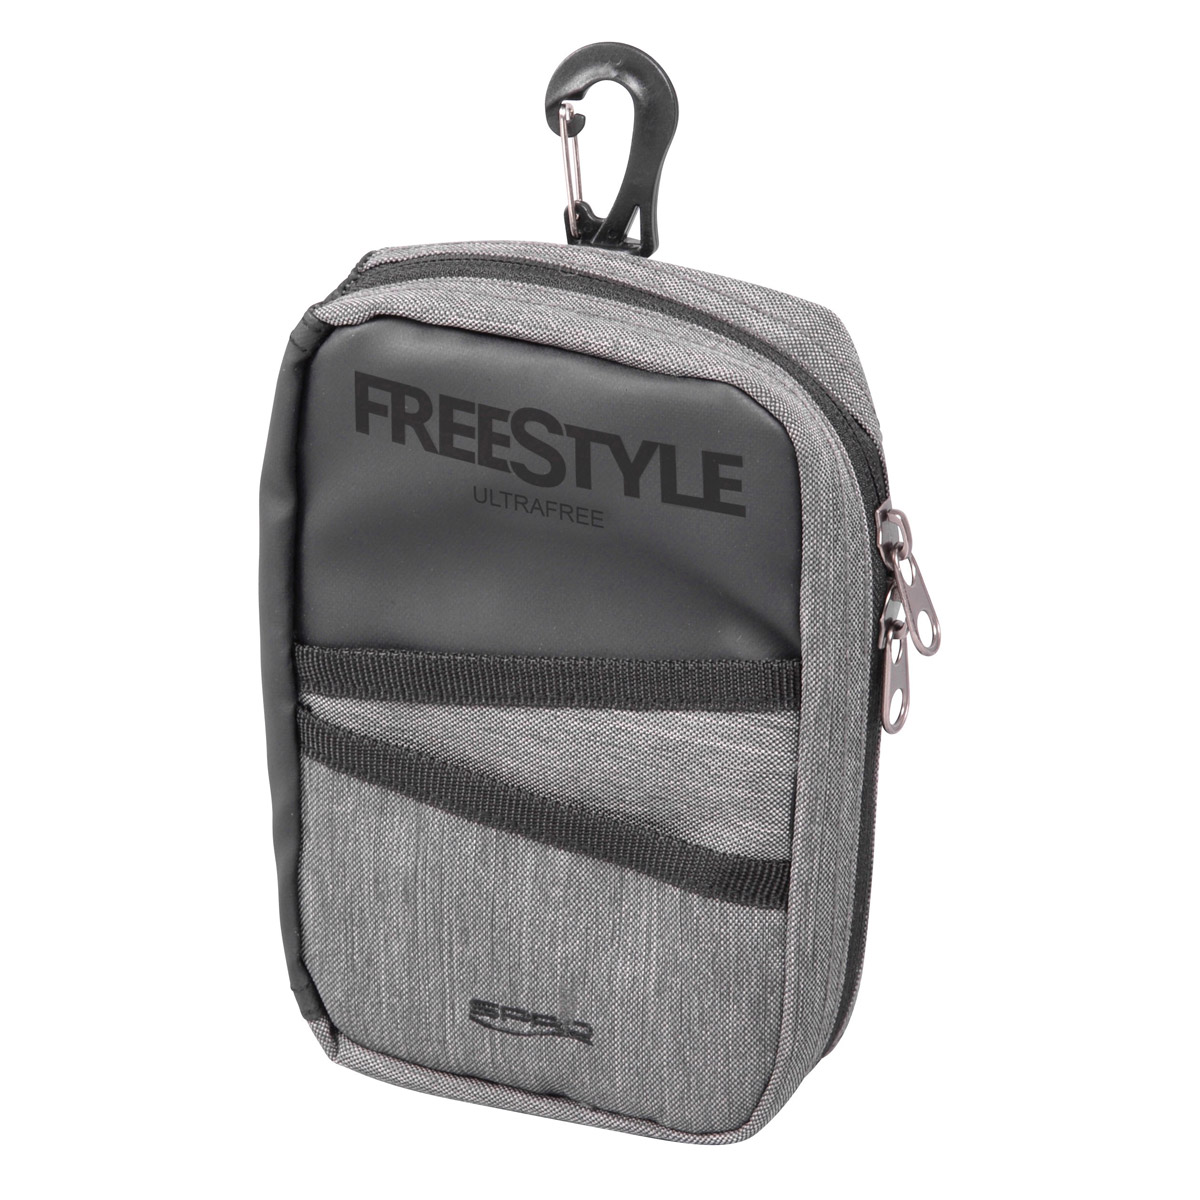 Spro freestyle ultra free lure pouch